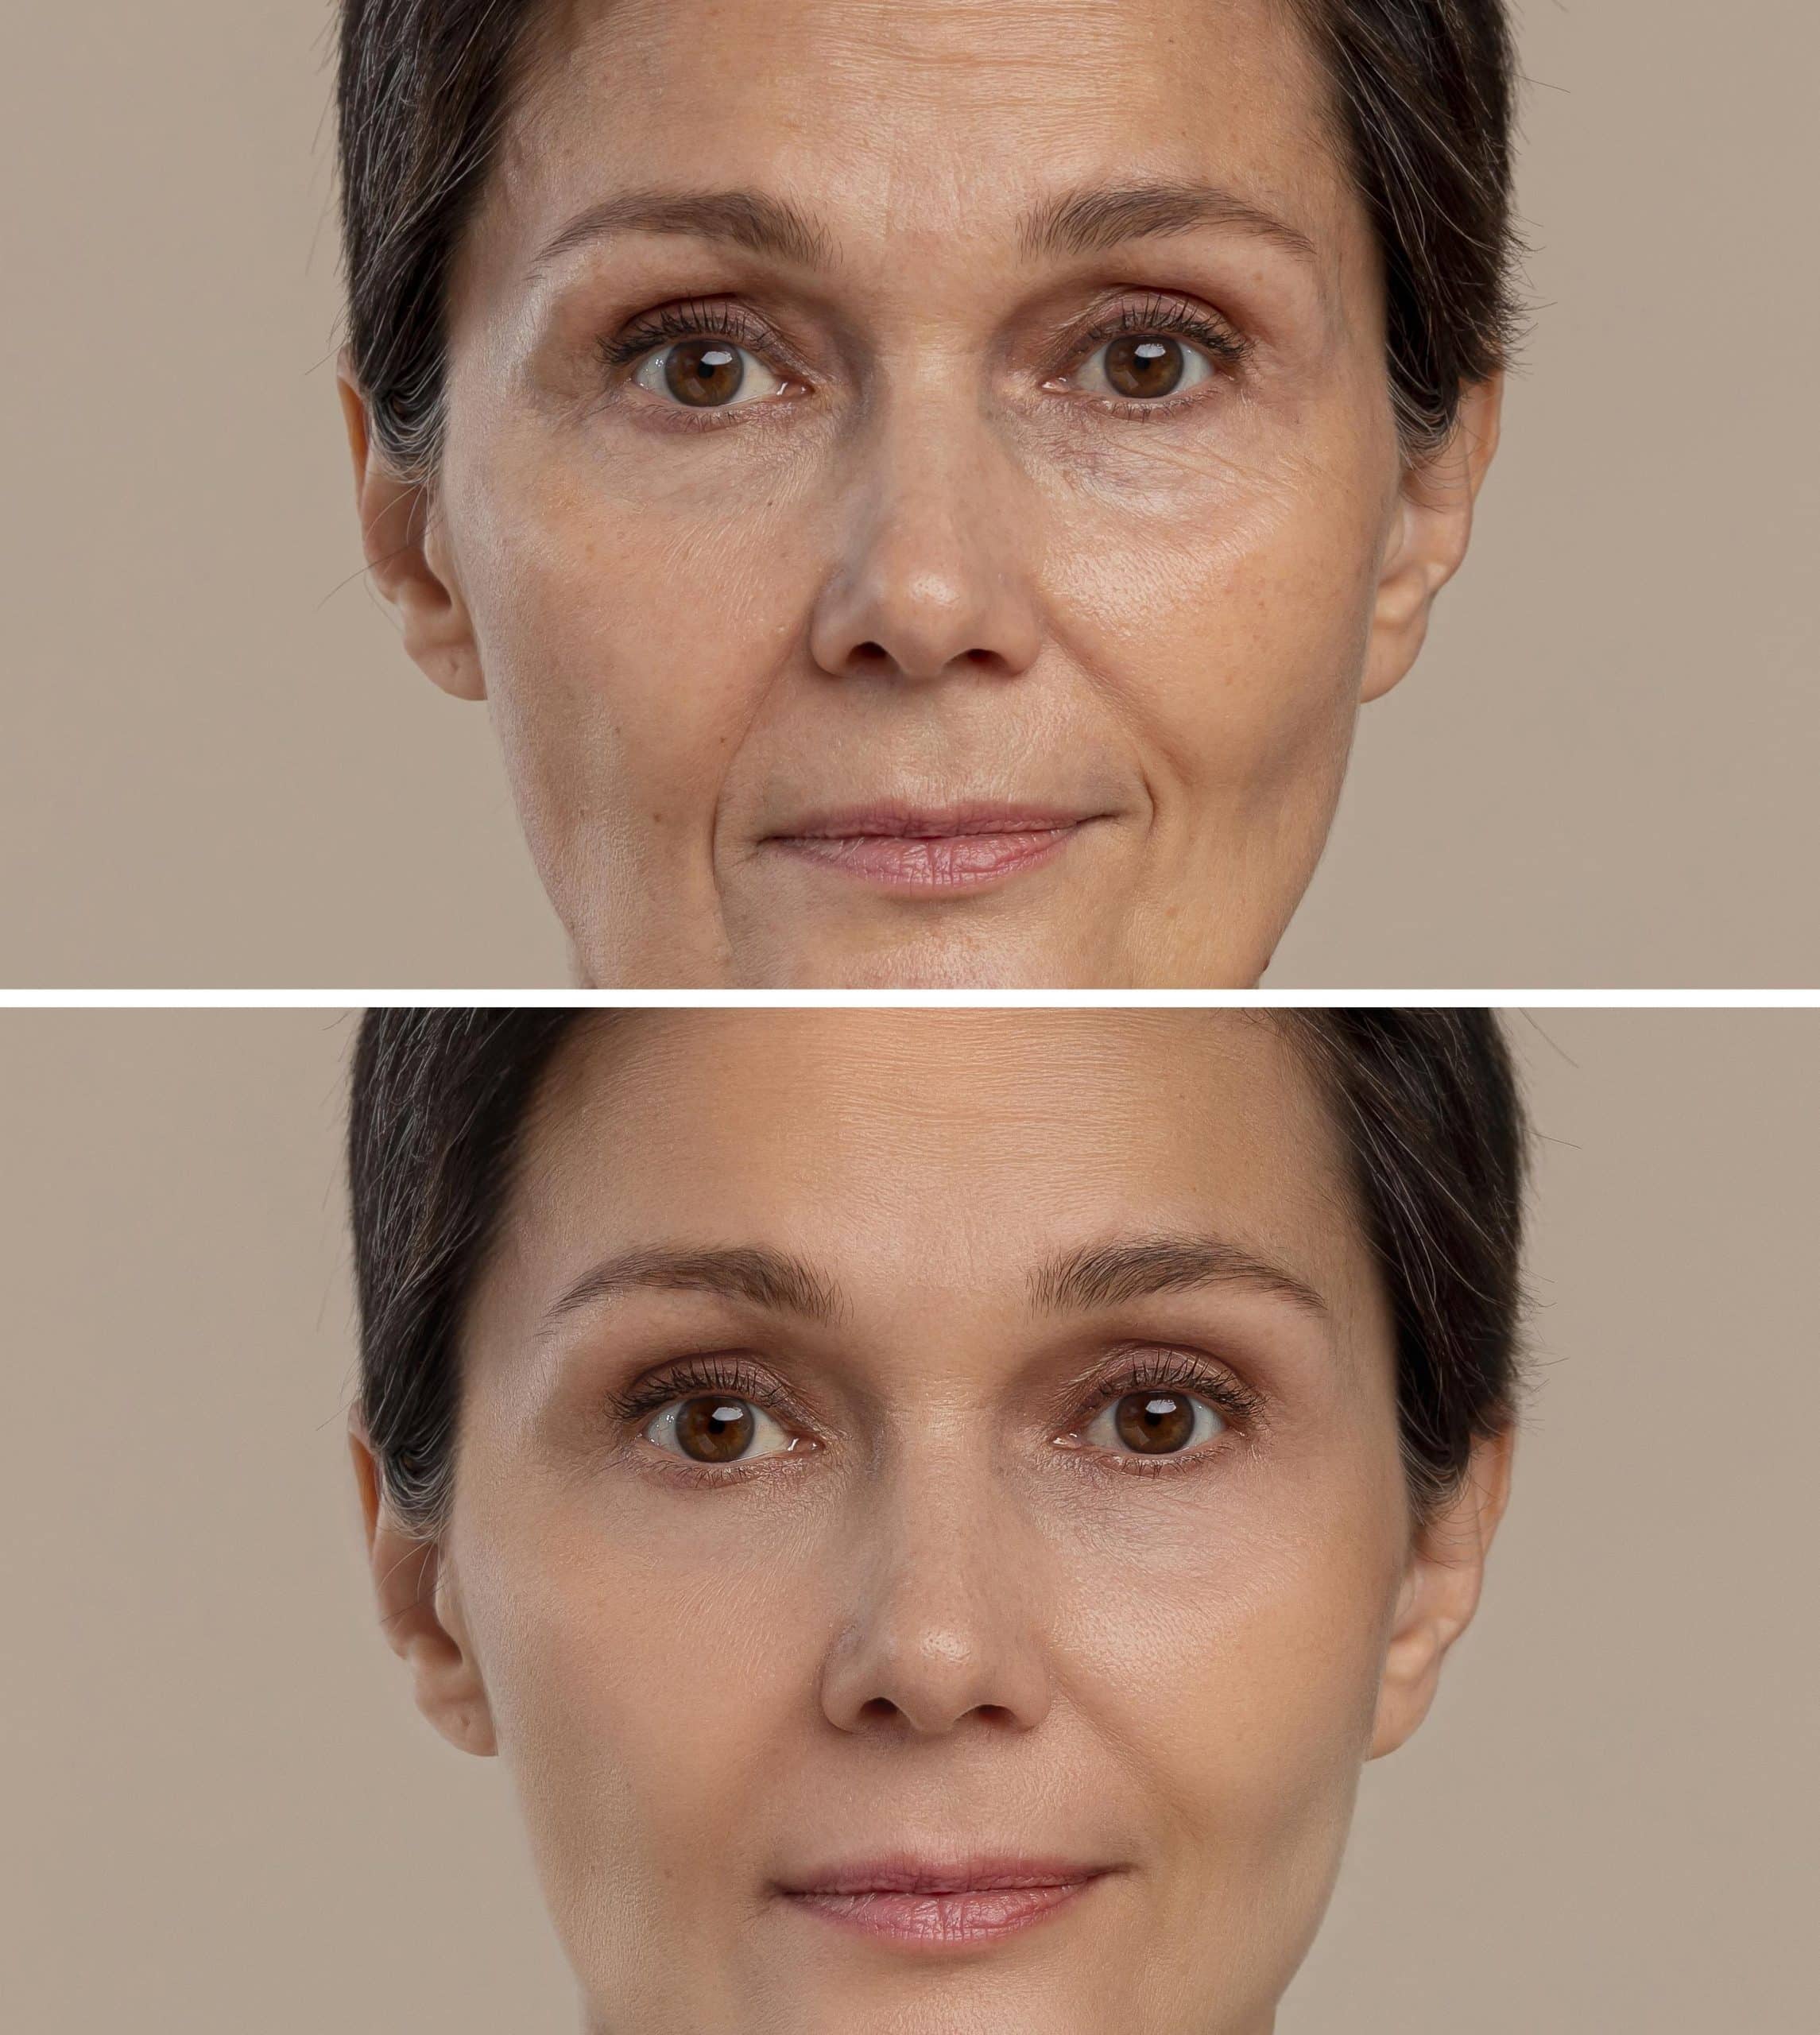 Rejuvenate and Lift: The Non-Surgical Face Lift Solution